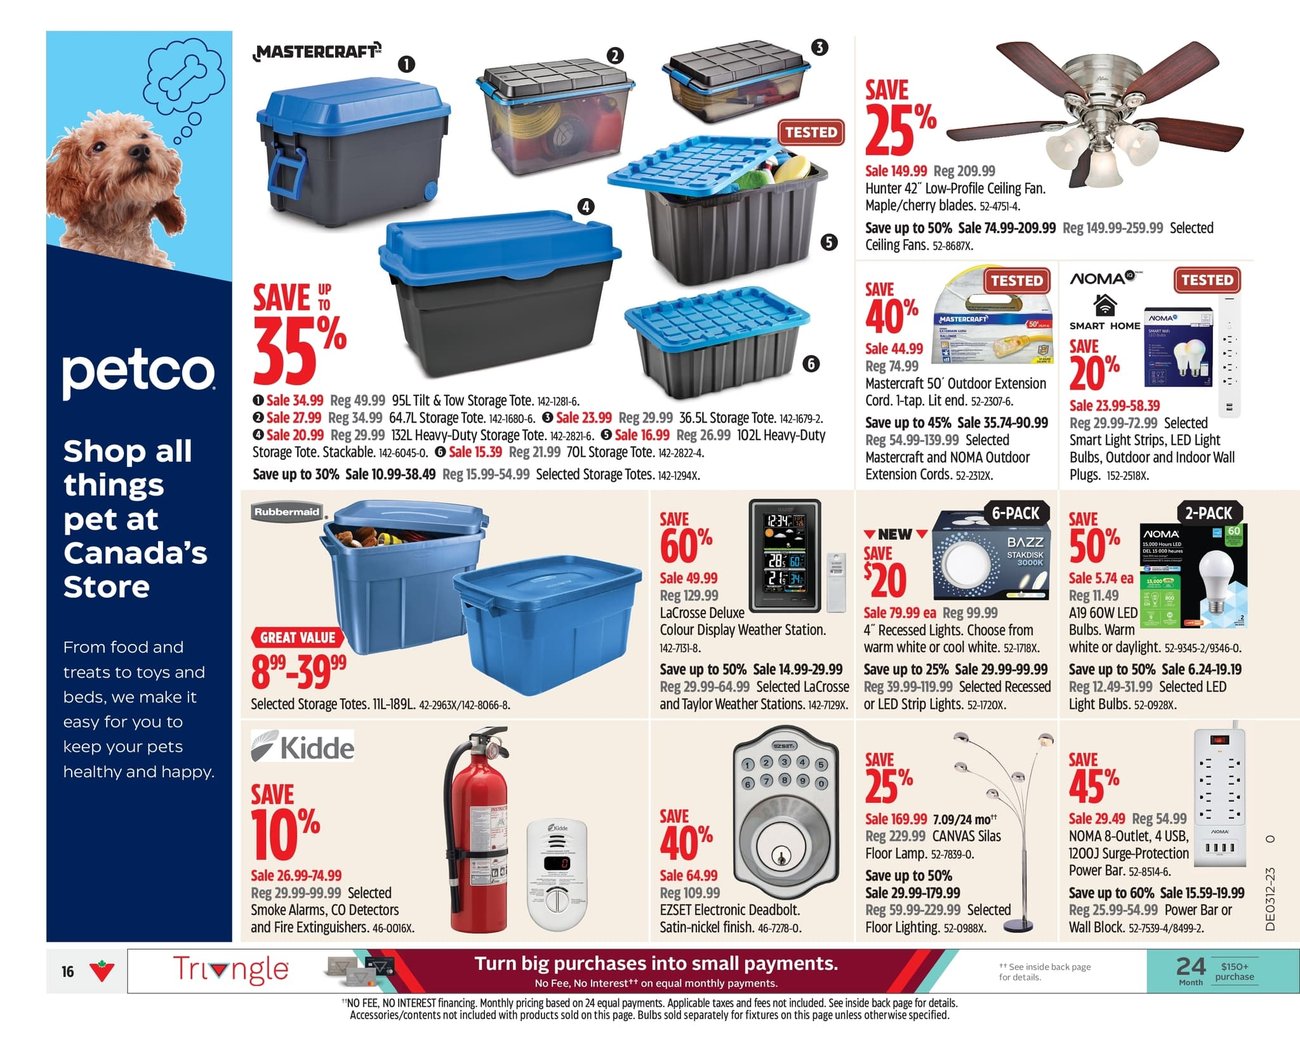 Canadian Tire - Weekly Flyer Specials - Page 19